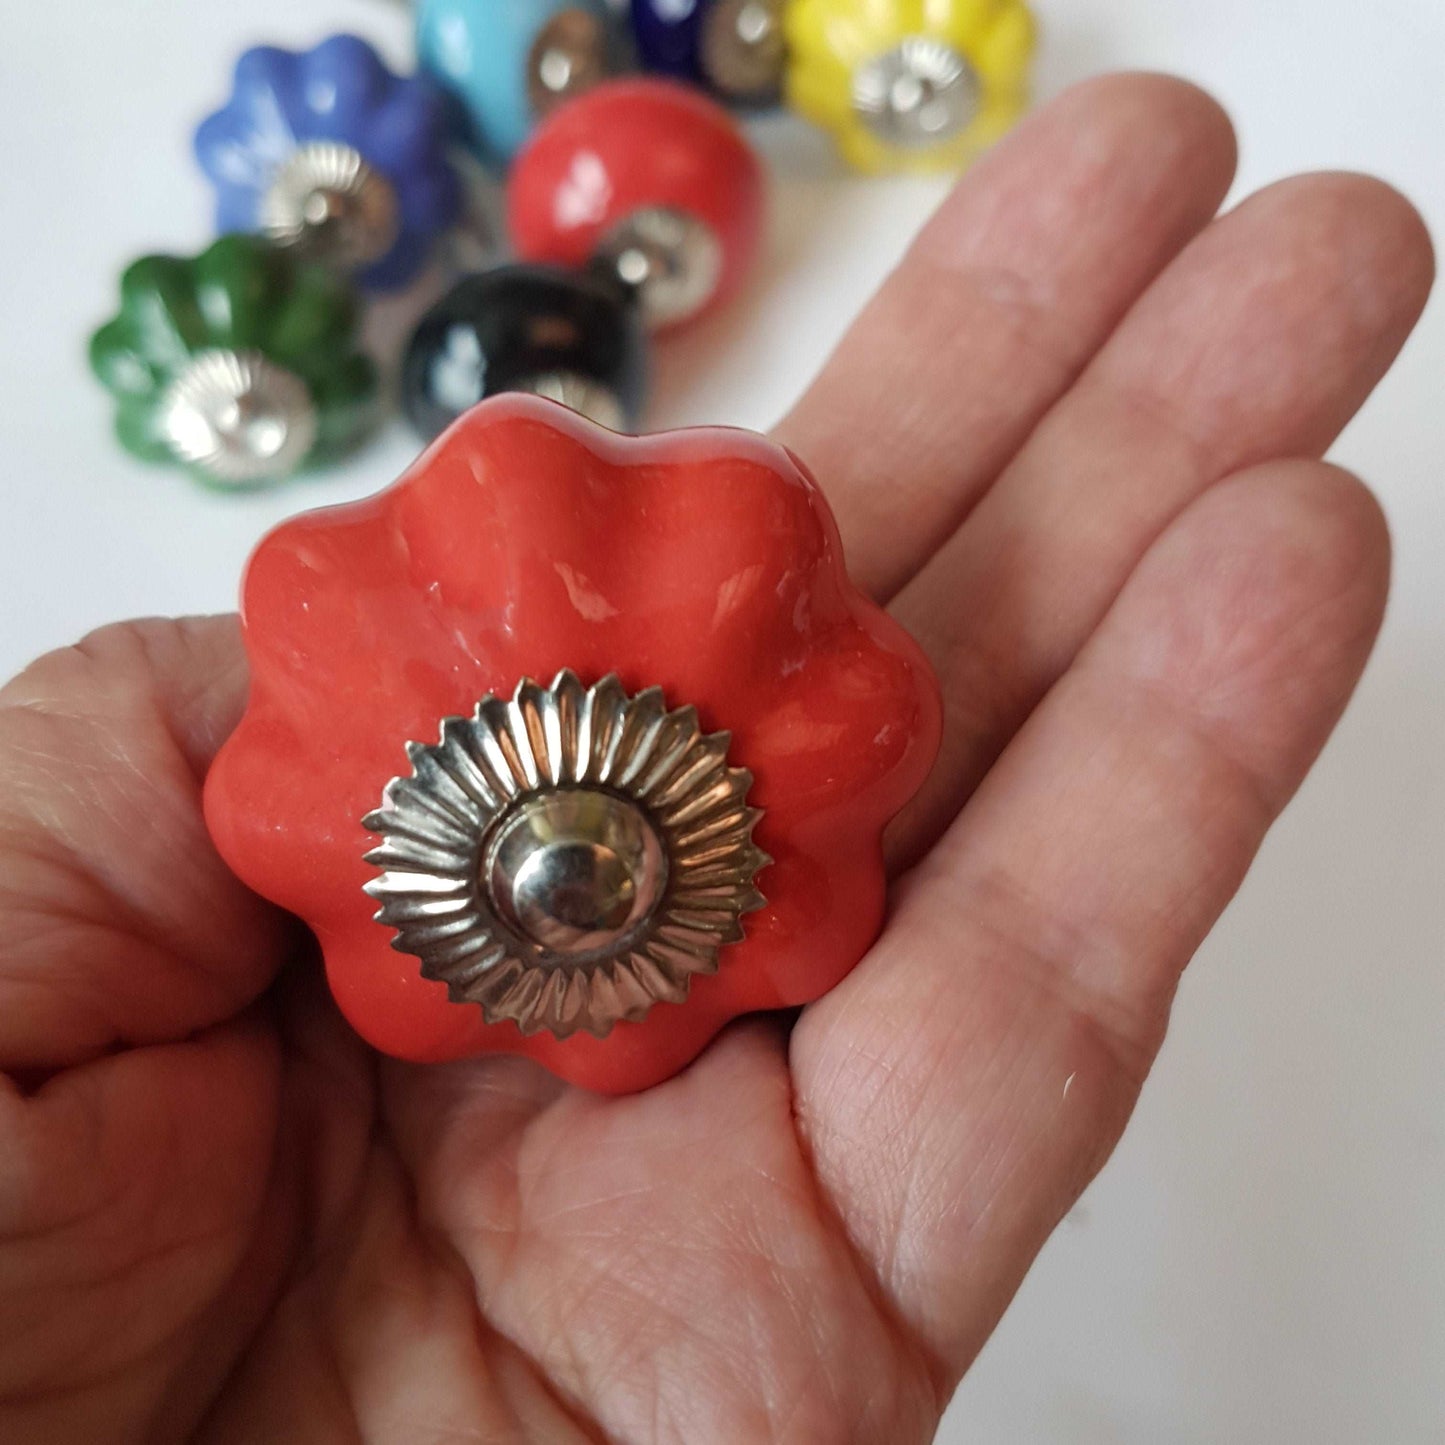 8 cabinet knobs-drawer pulls for cupboards & dressers. Ceramic 8 piece hardware set of vibrant solid colors. 1.5 inch diameter.